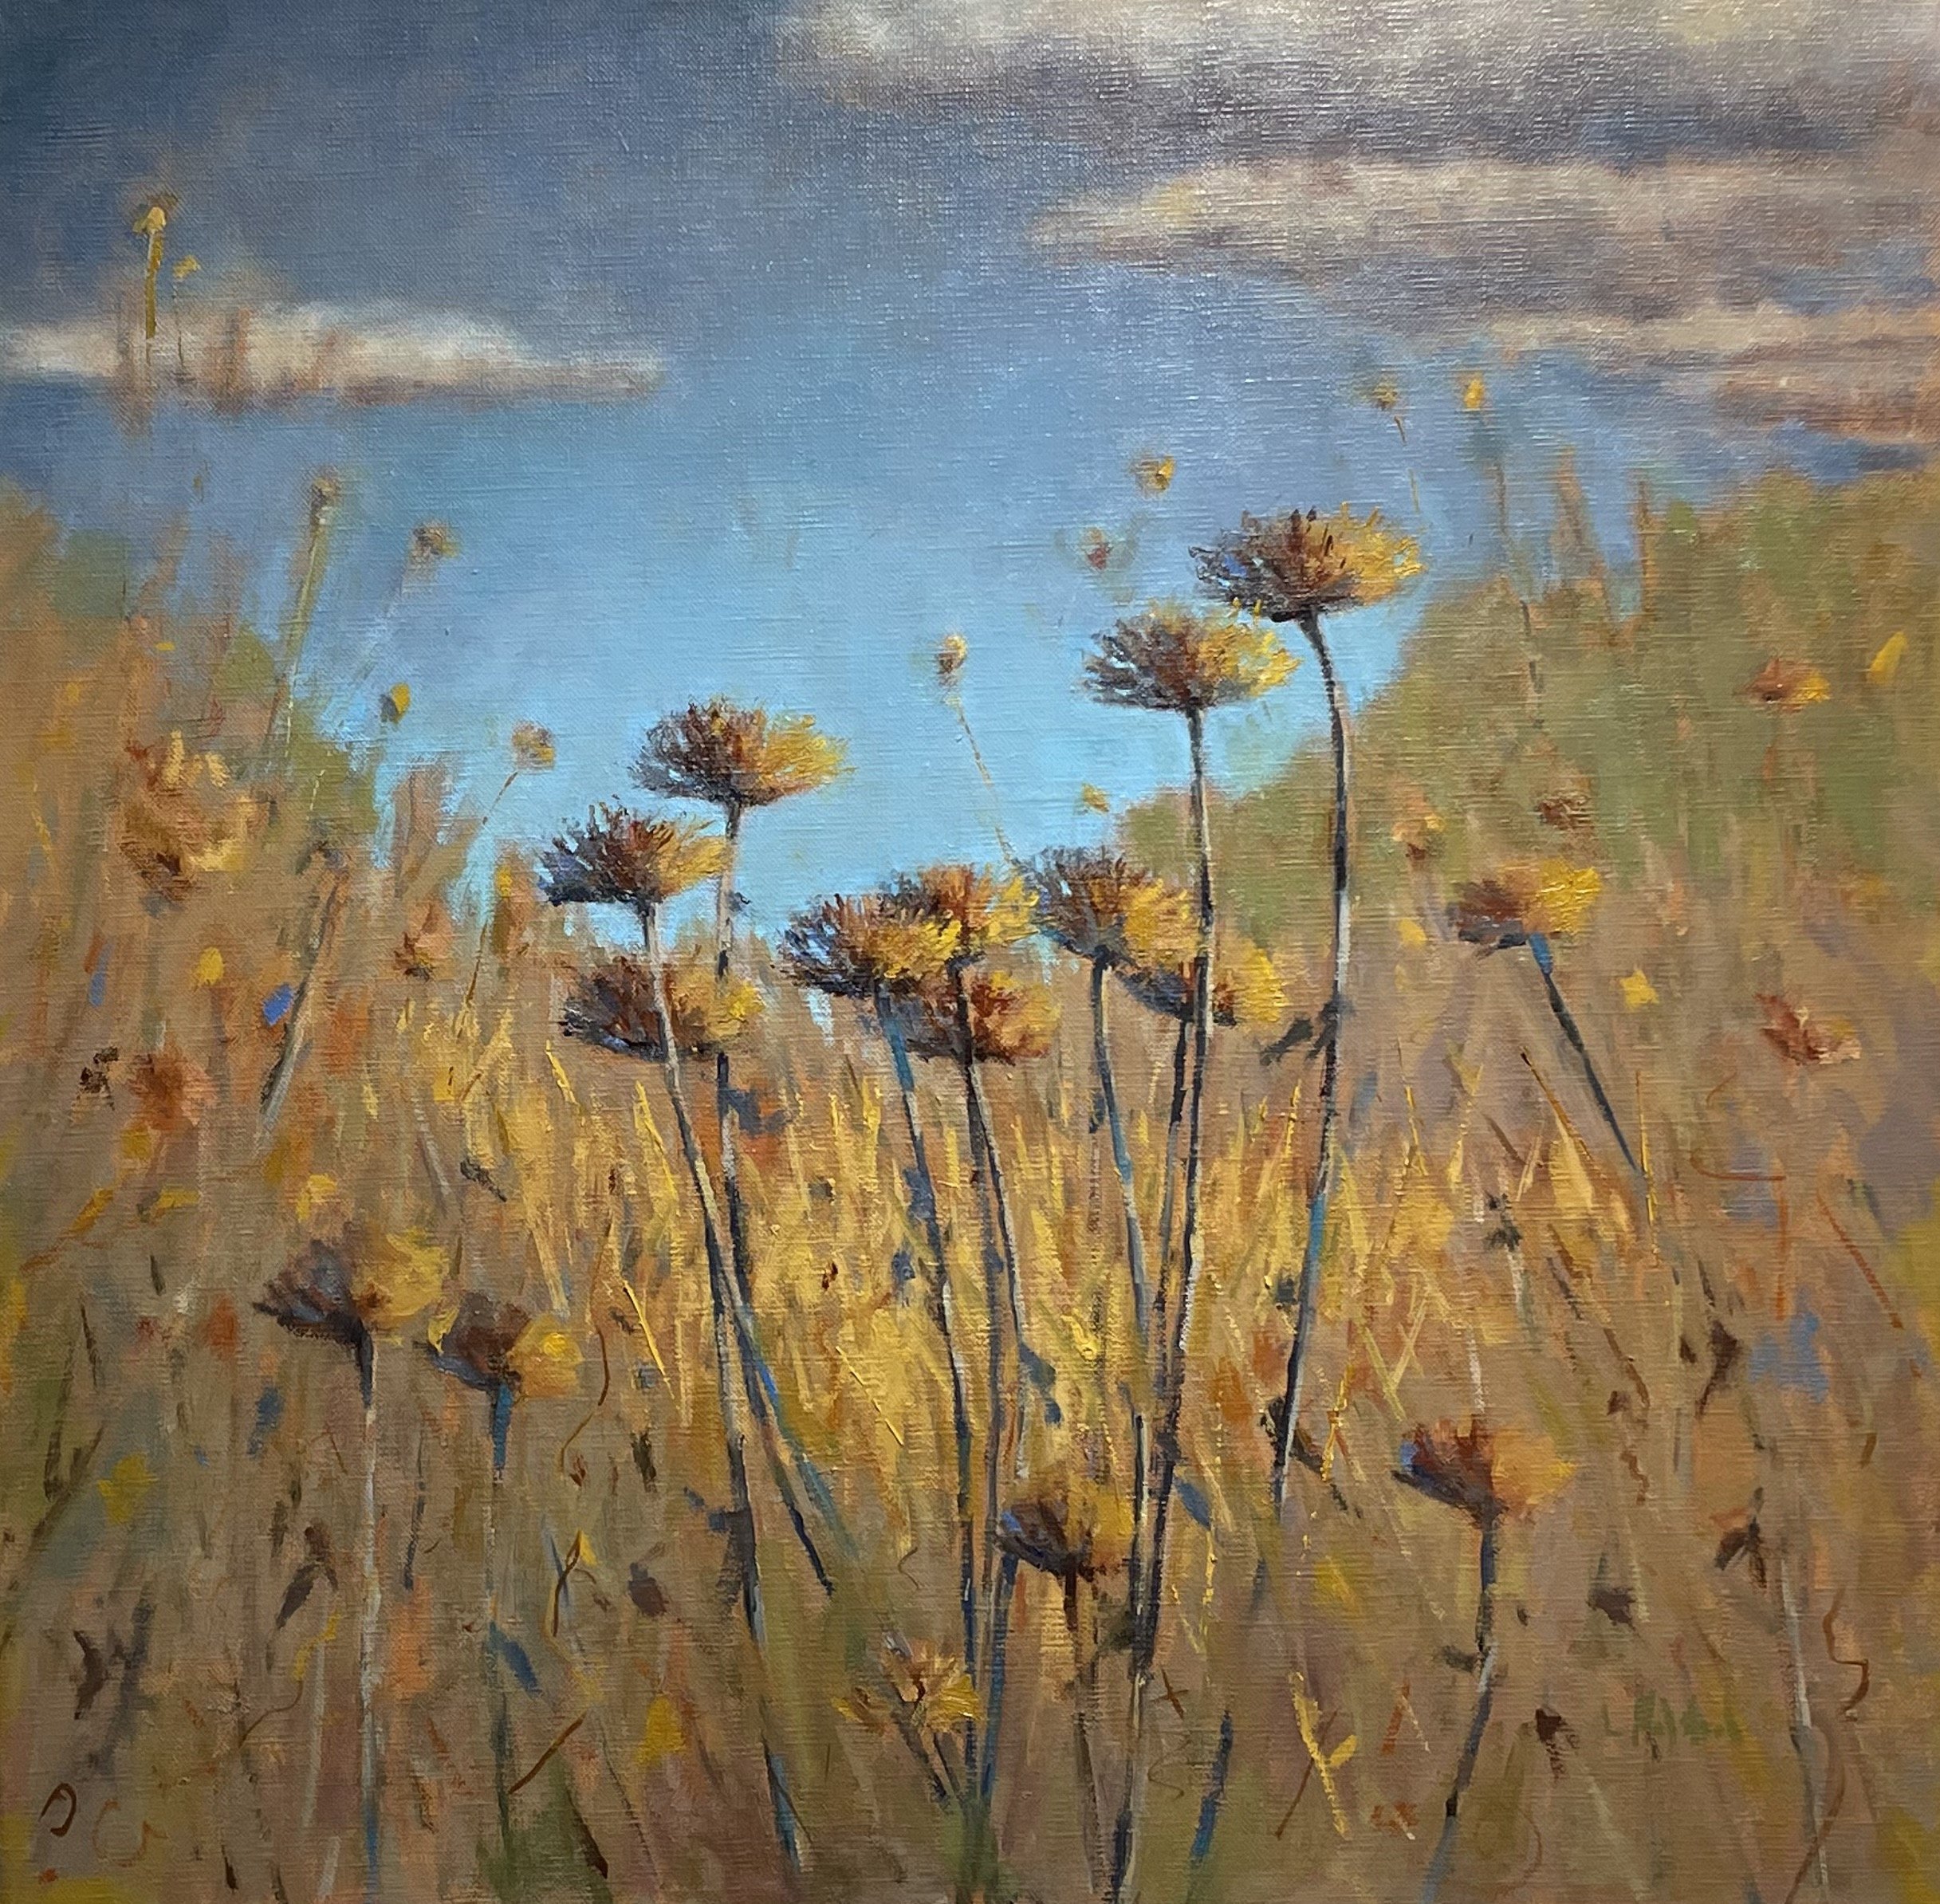 Scattering Seeds, oil on linen 20 x 20, sold